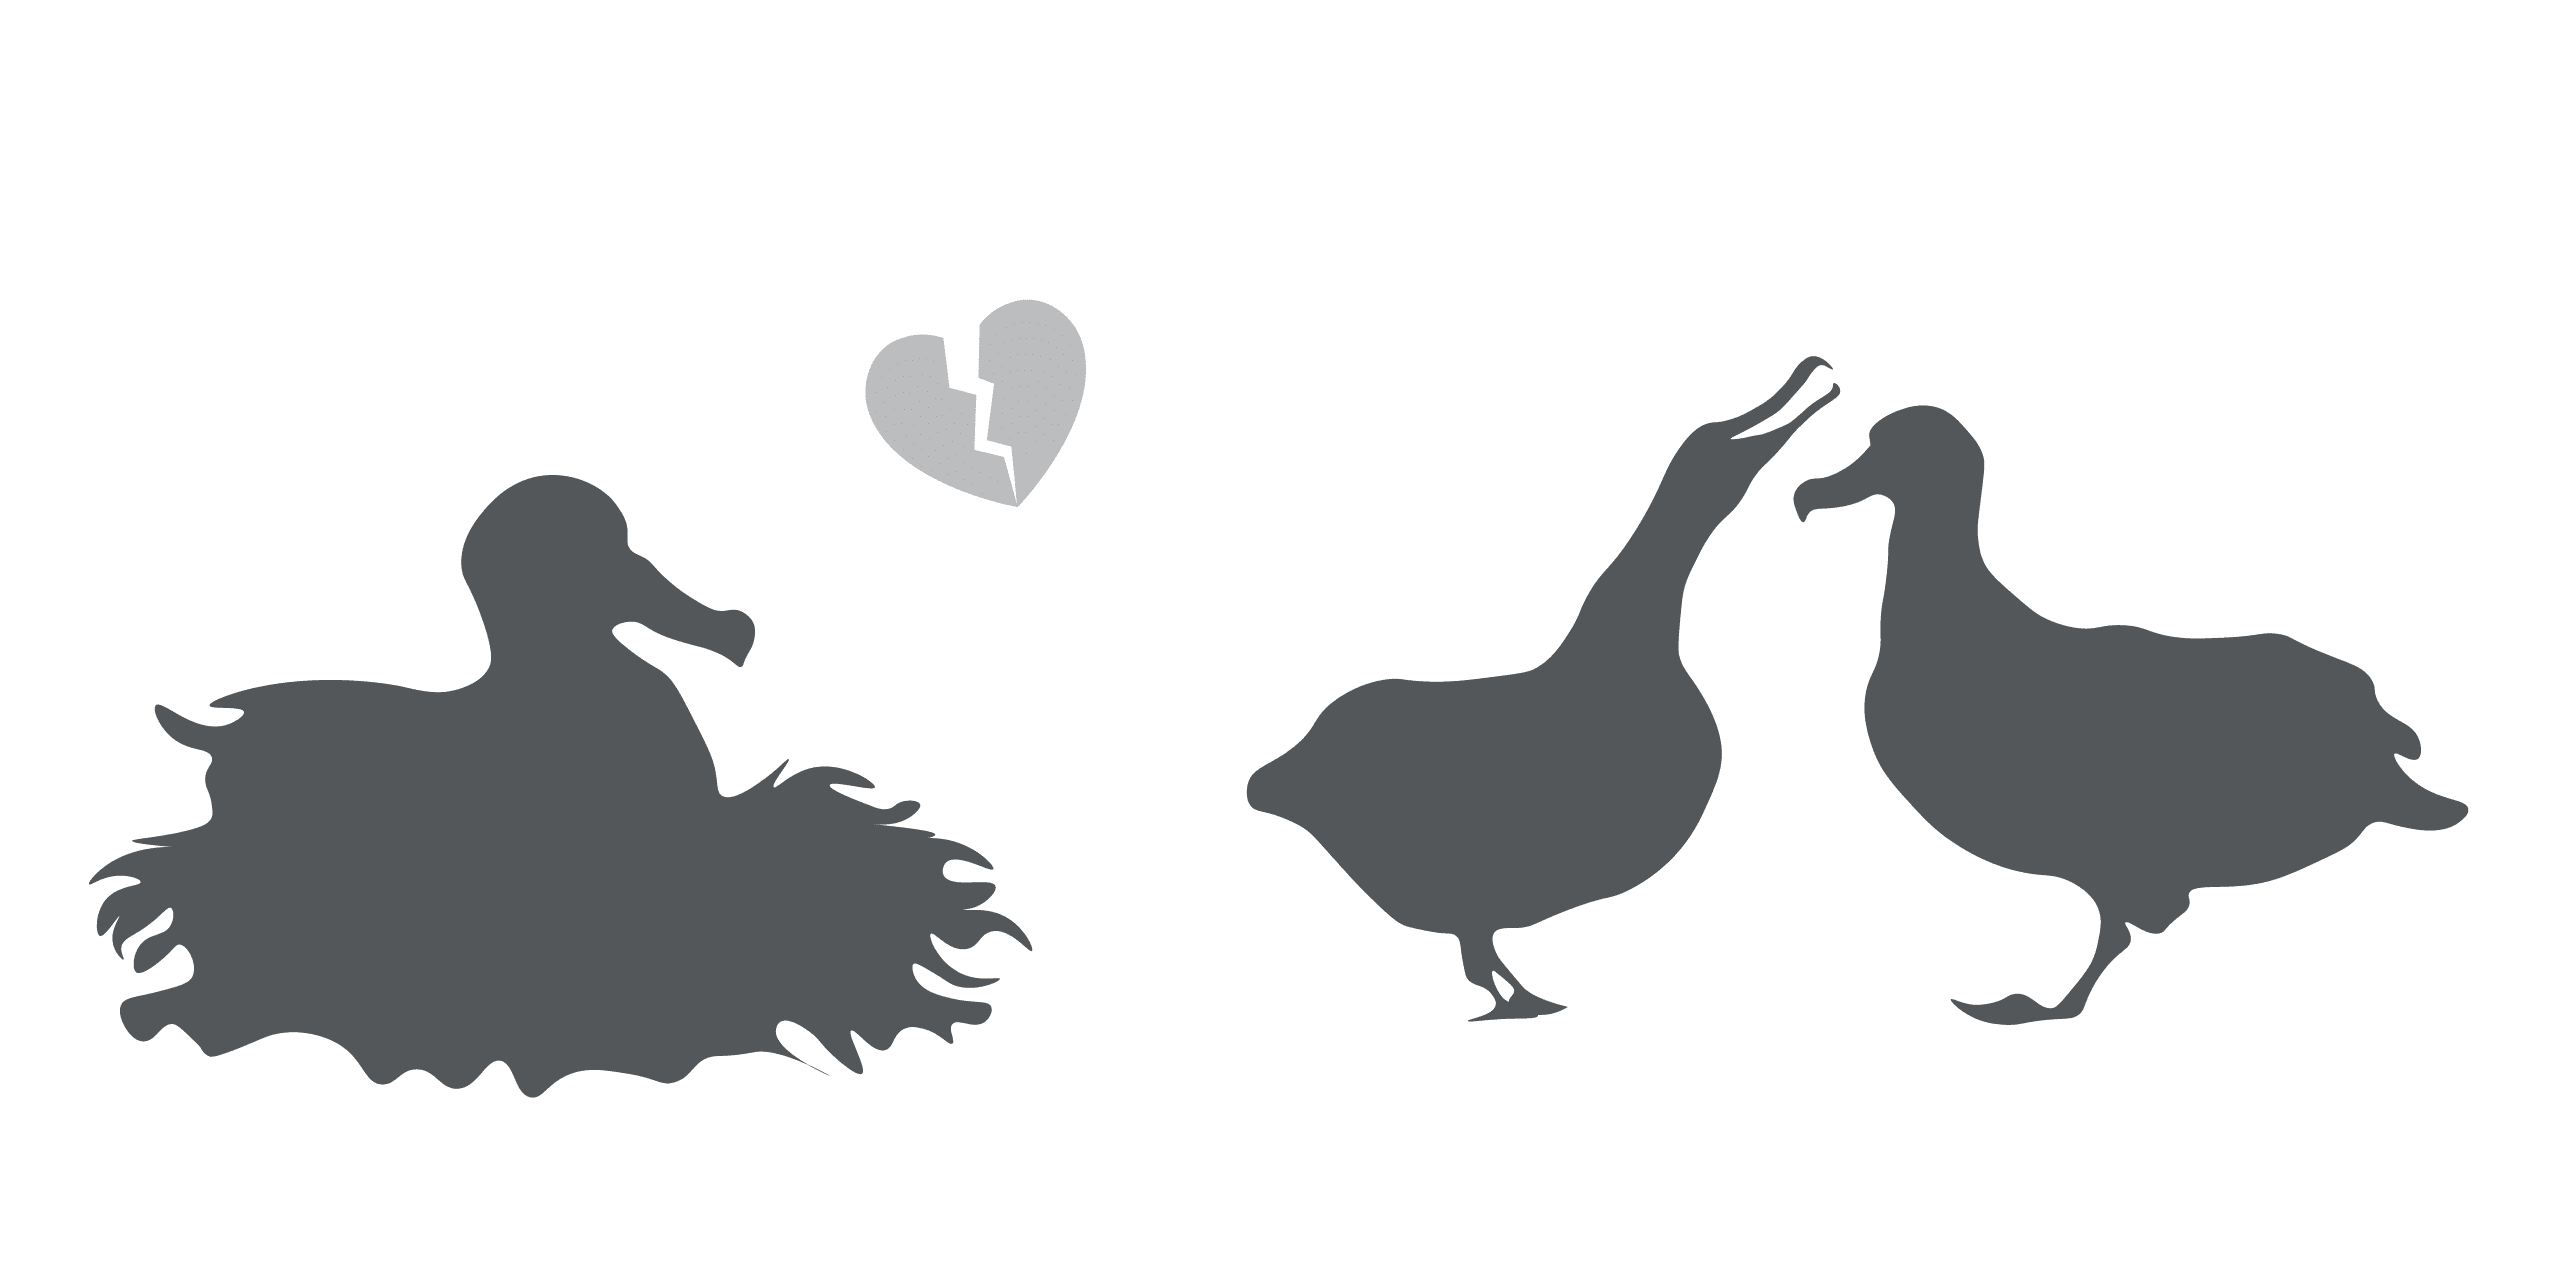 Adaptive divorce, which isn’t common among wandering albatrosses, is when a female leaves her partner for another mate to increase breeding opportunities and success. (Illustrations by Ruijiao Sun, © Woods Hole Oceanographic Institution)